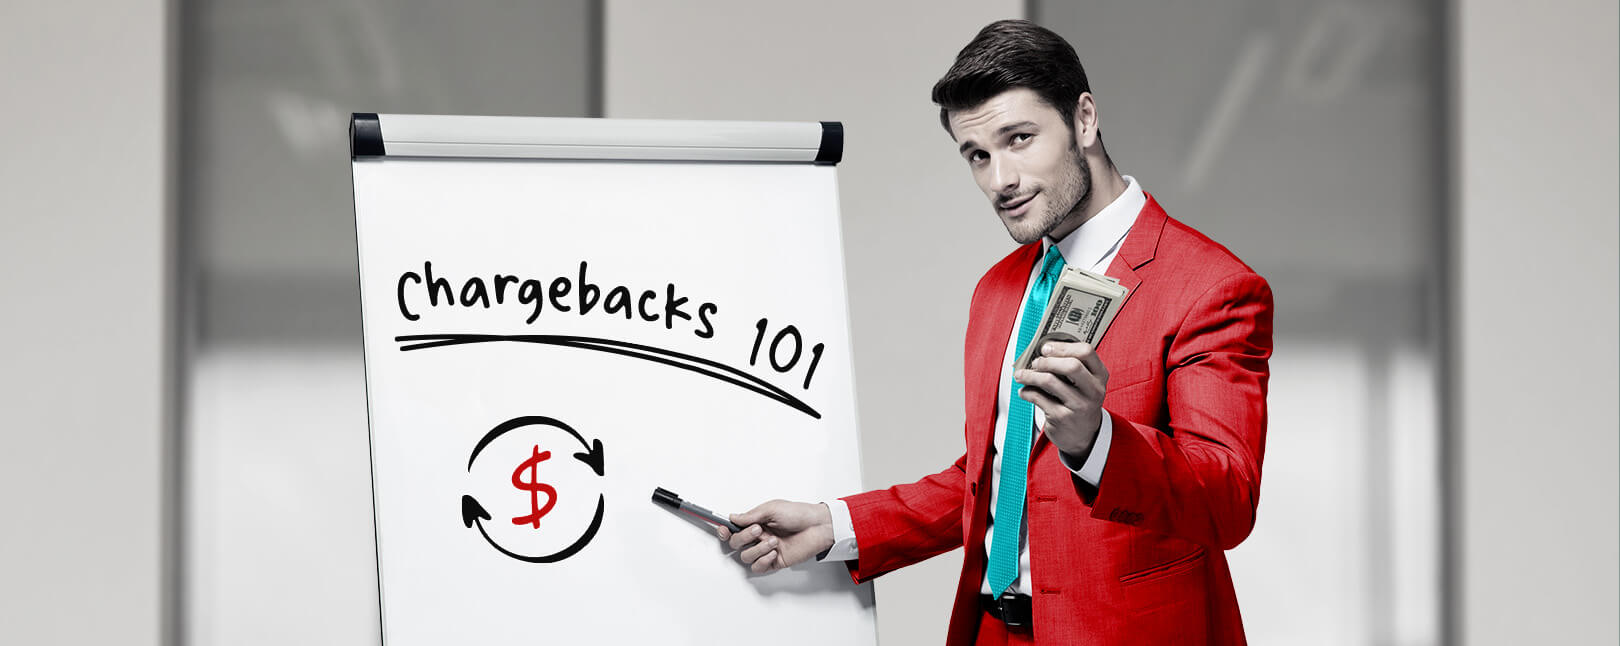 Chargeback Rules